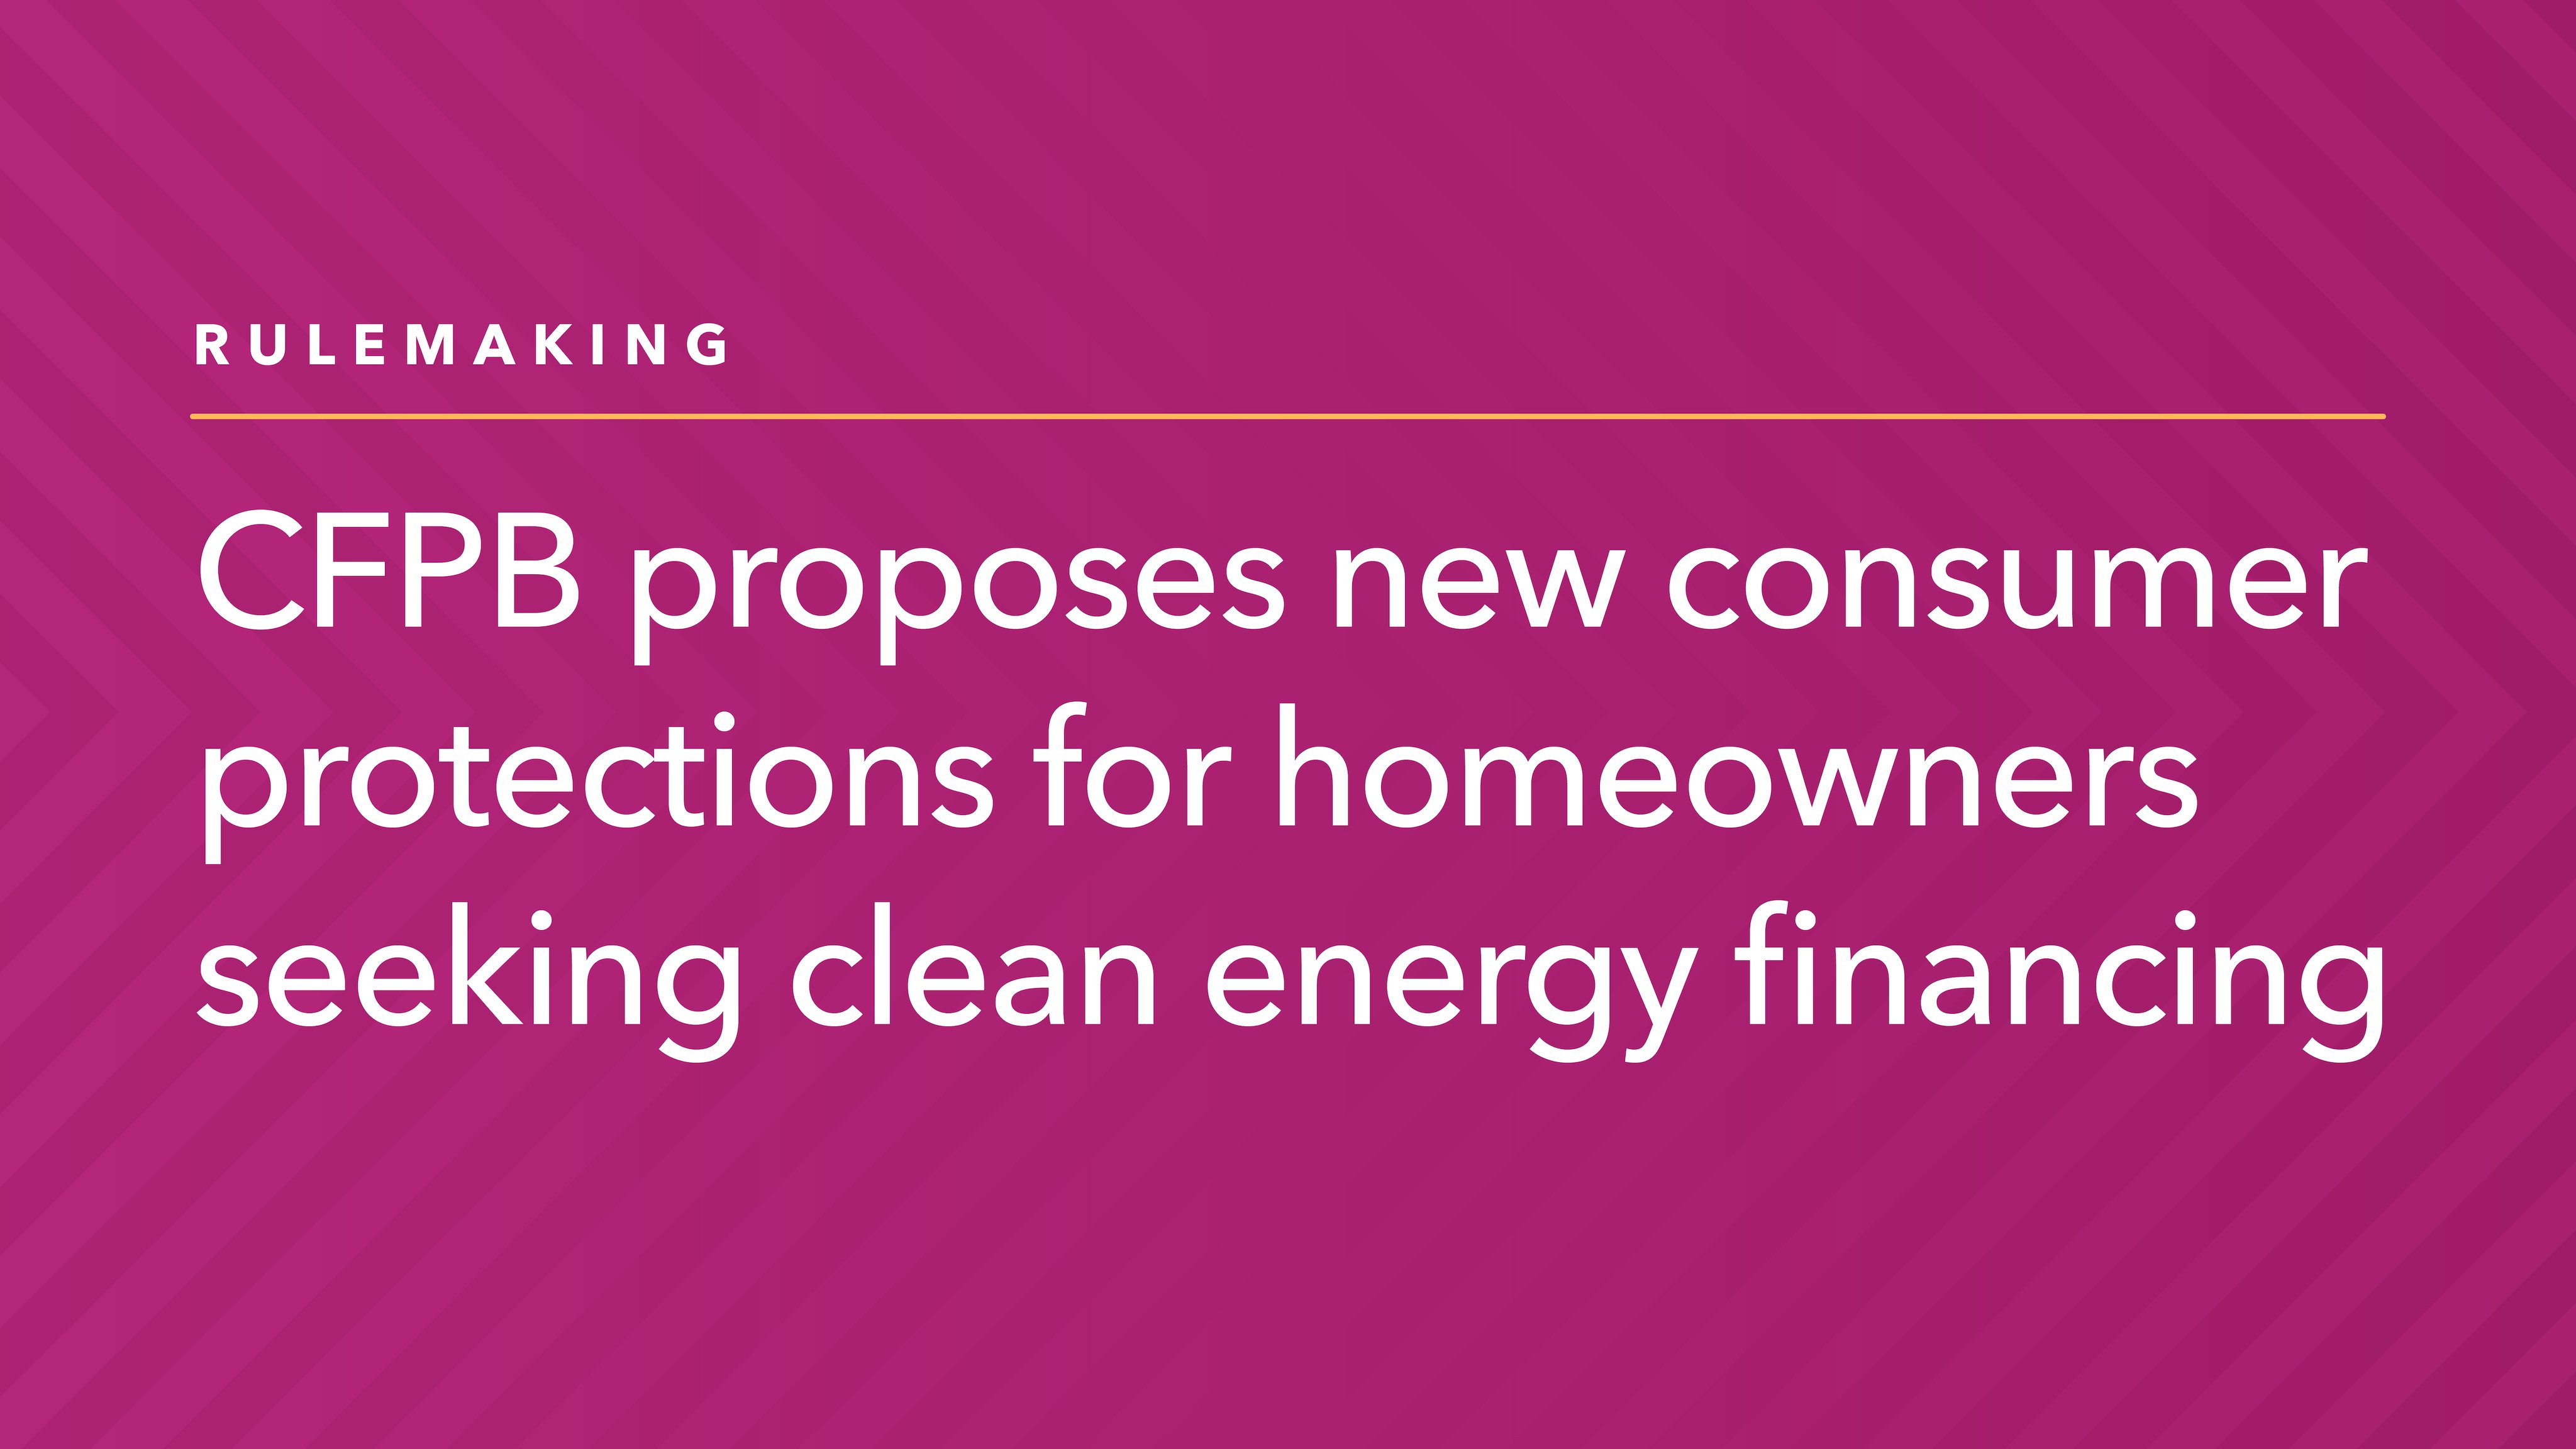 CFPB Proposes New Consumer Protections for Homeowners Seeking Clean Energy Financing